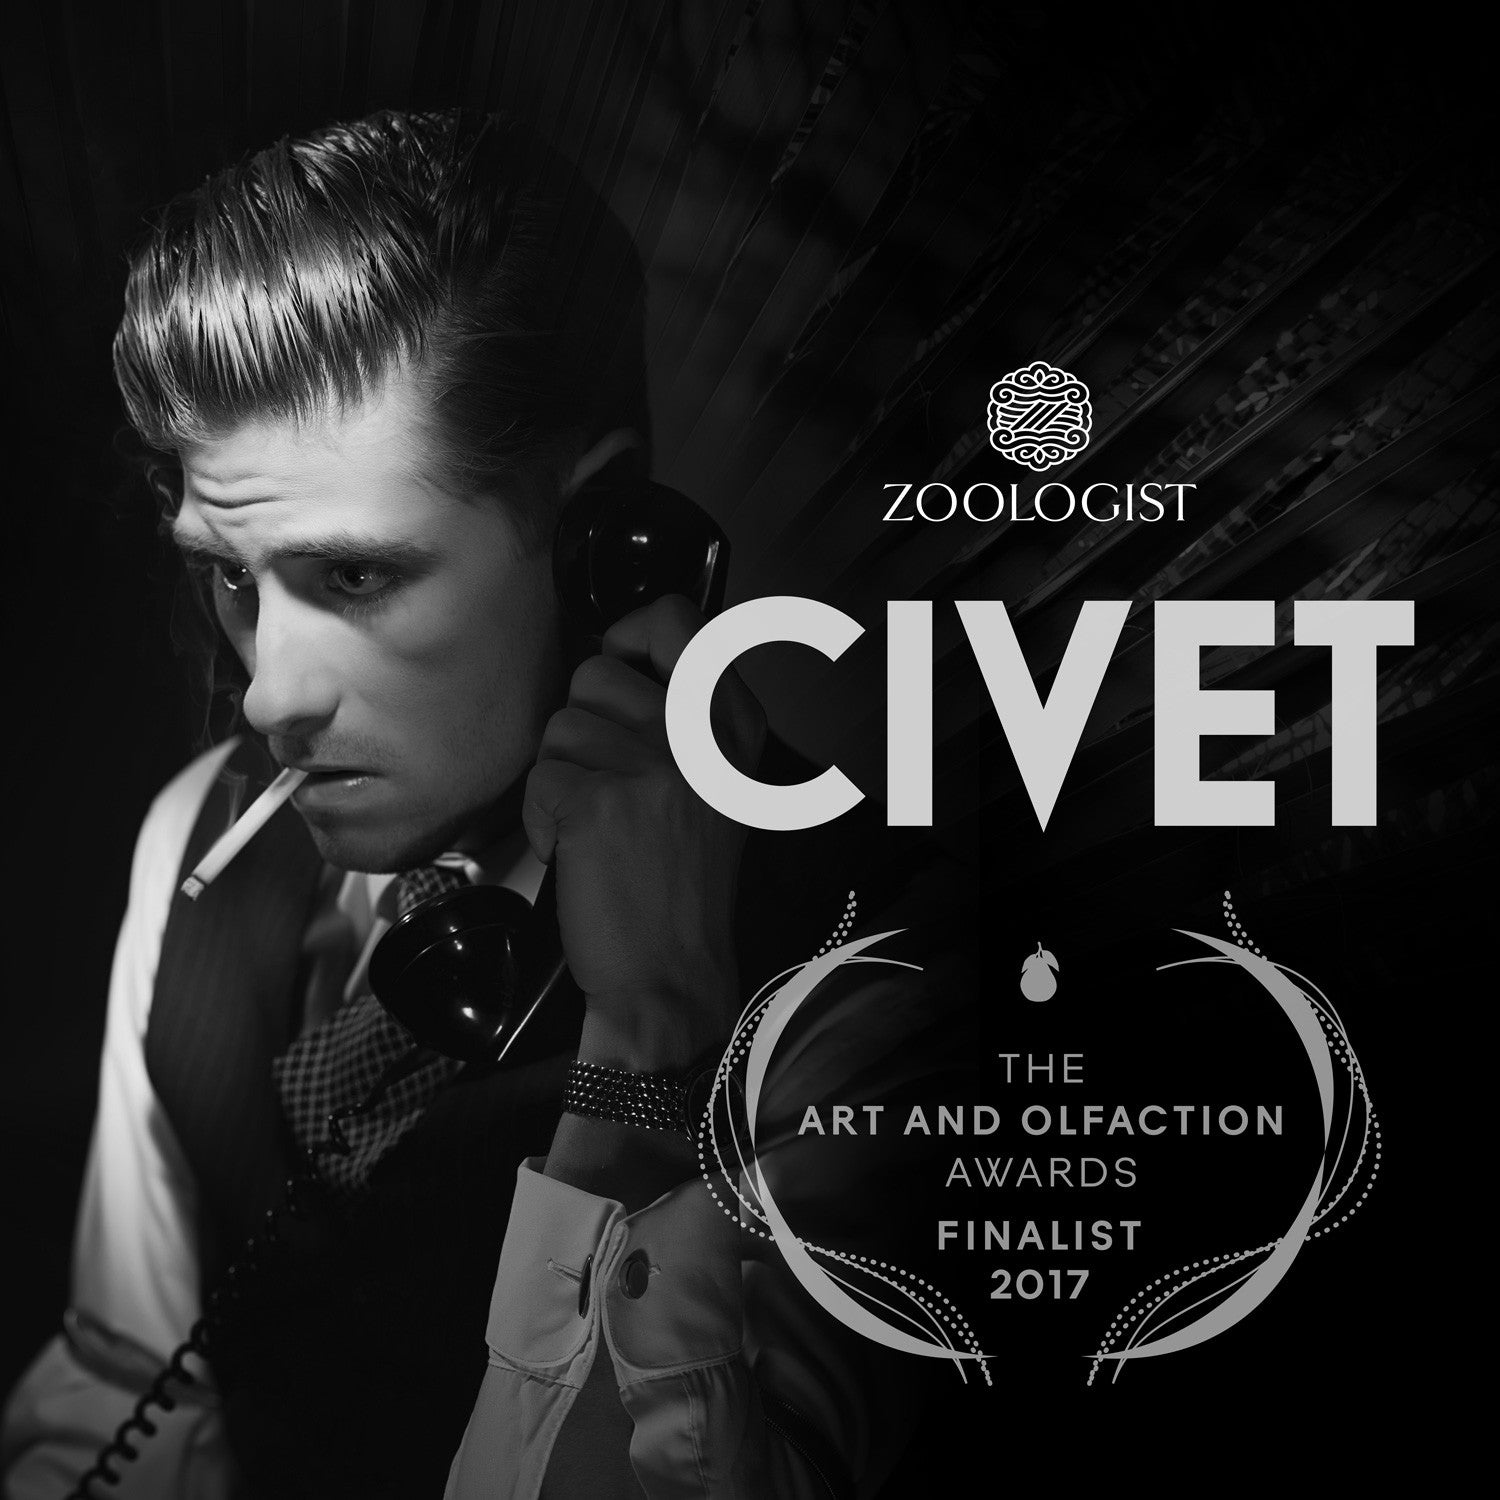 Zoologist Civet a Finalist for The Art and Olfaction Awards 2017